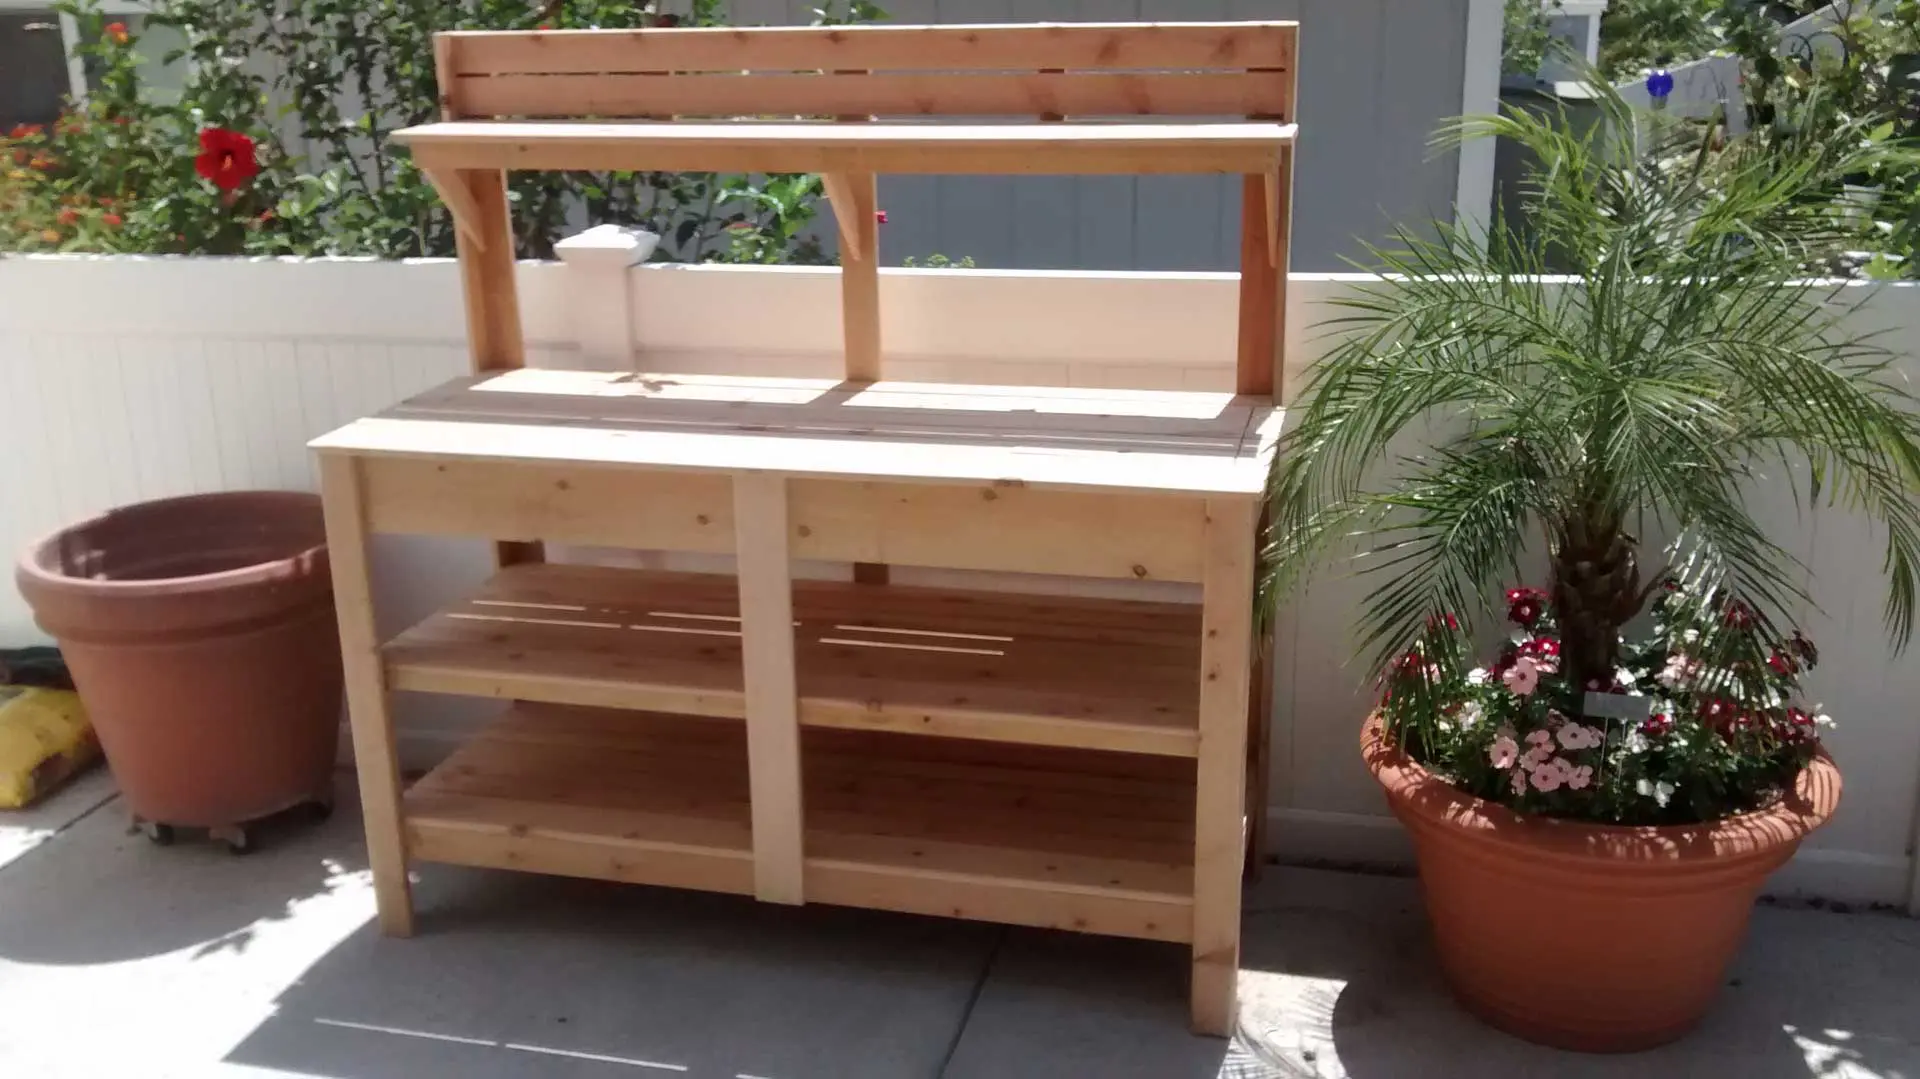 A wooden bench with two shelves and a plant.